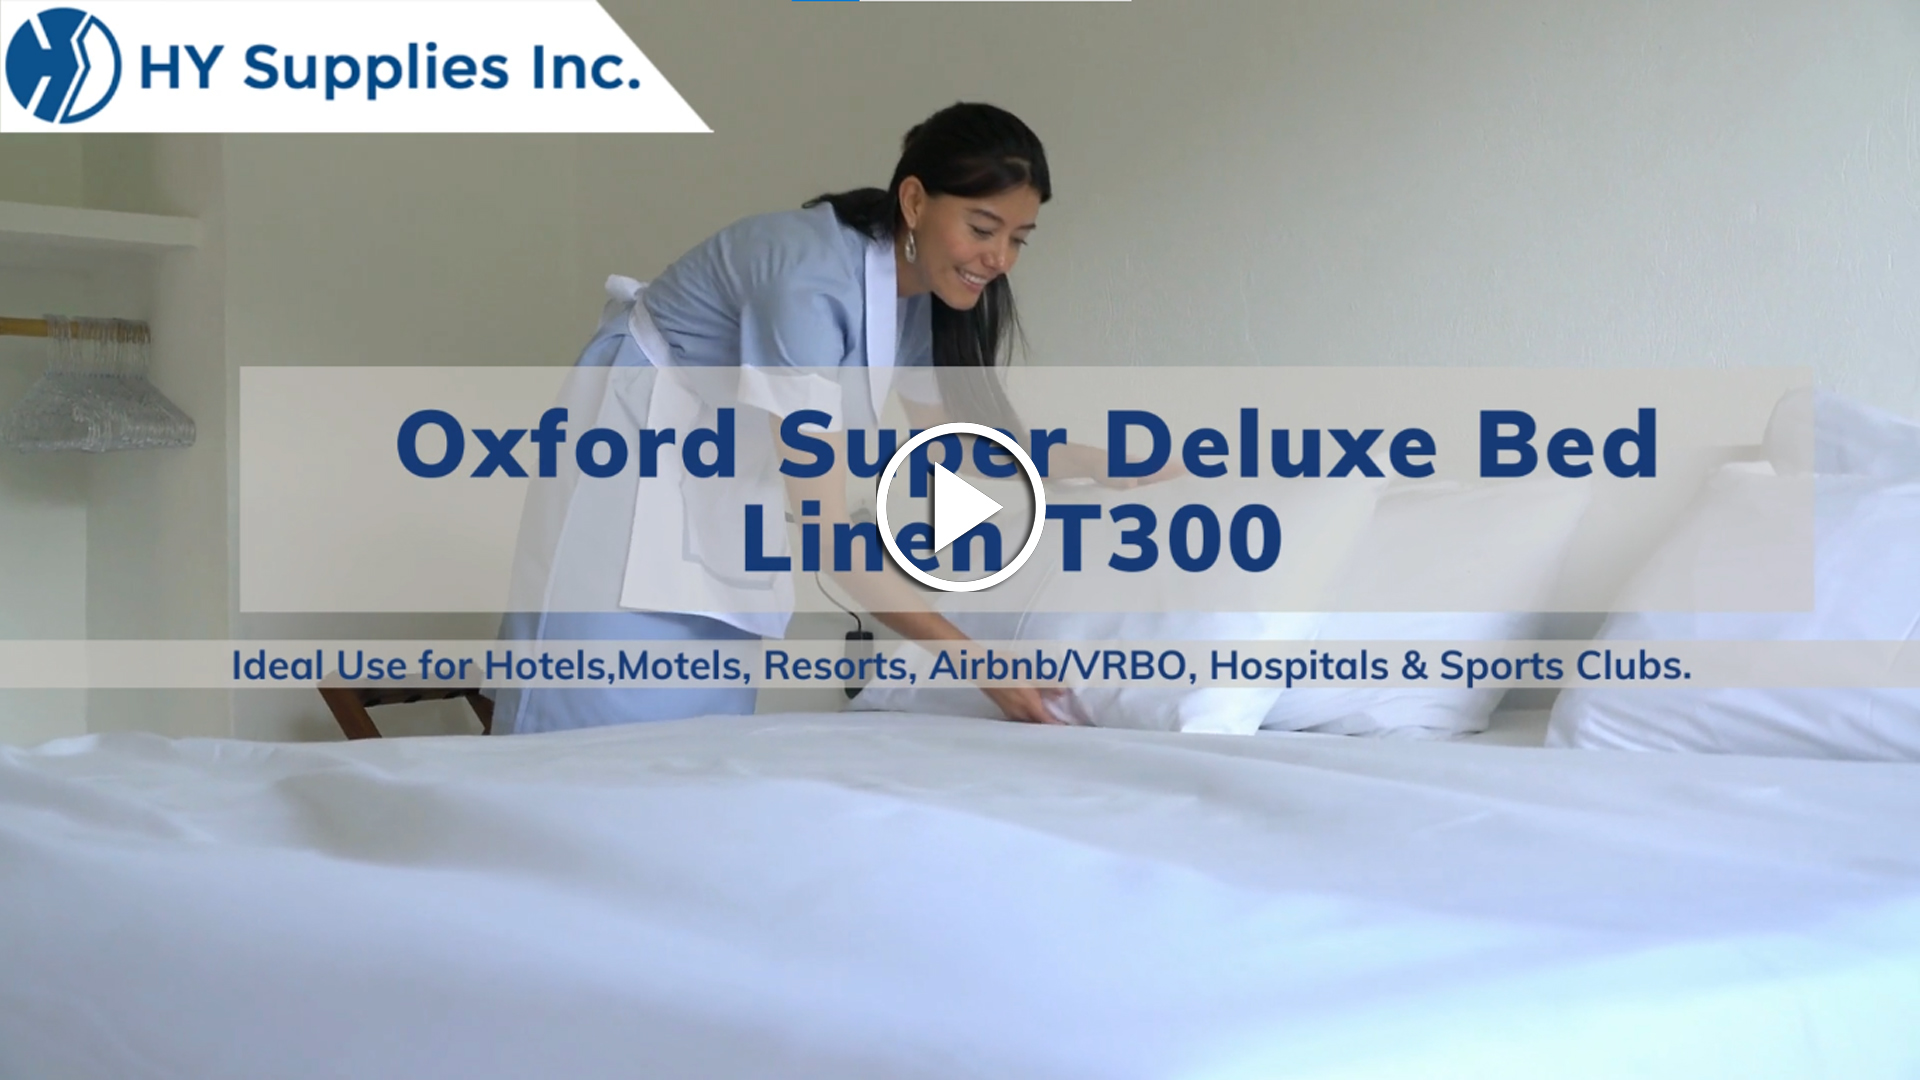 Oxford Super Deluxe Bed Linen T300 